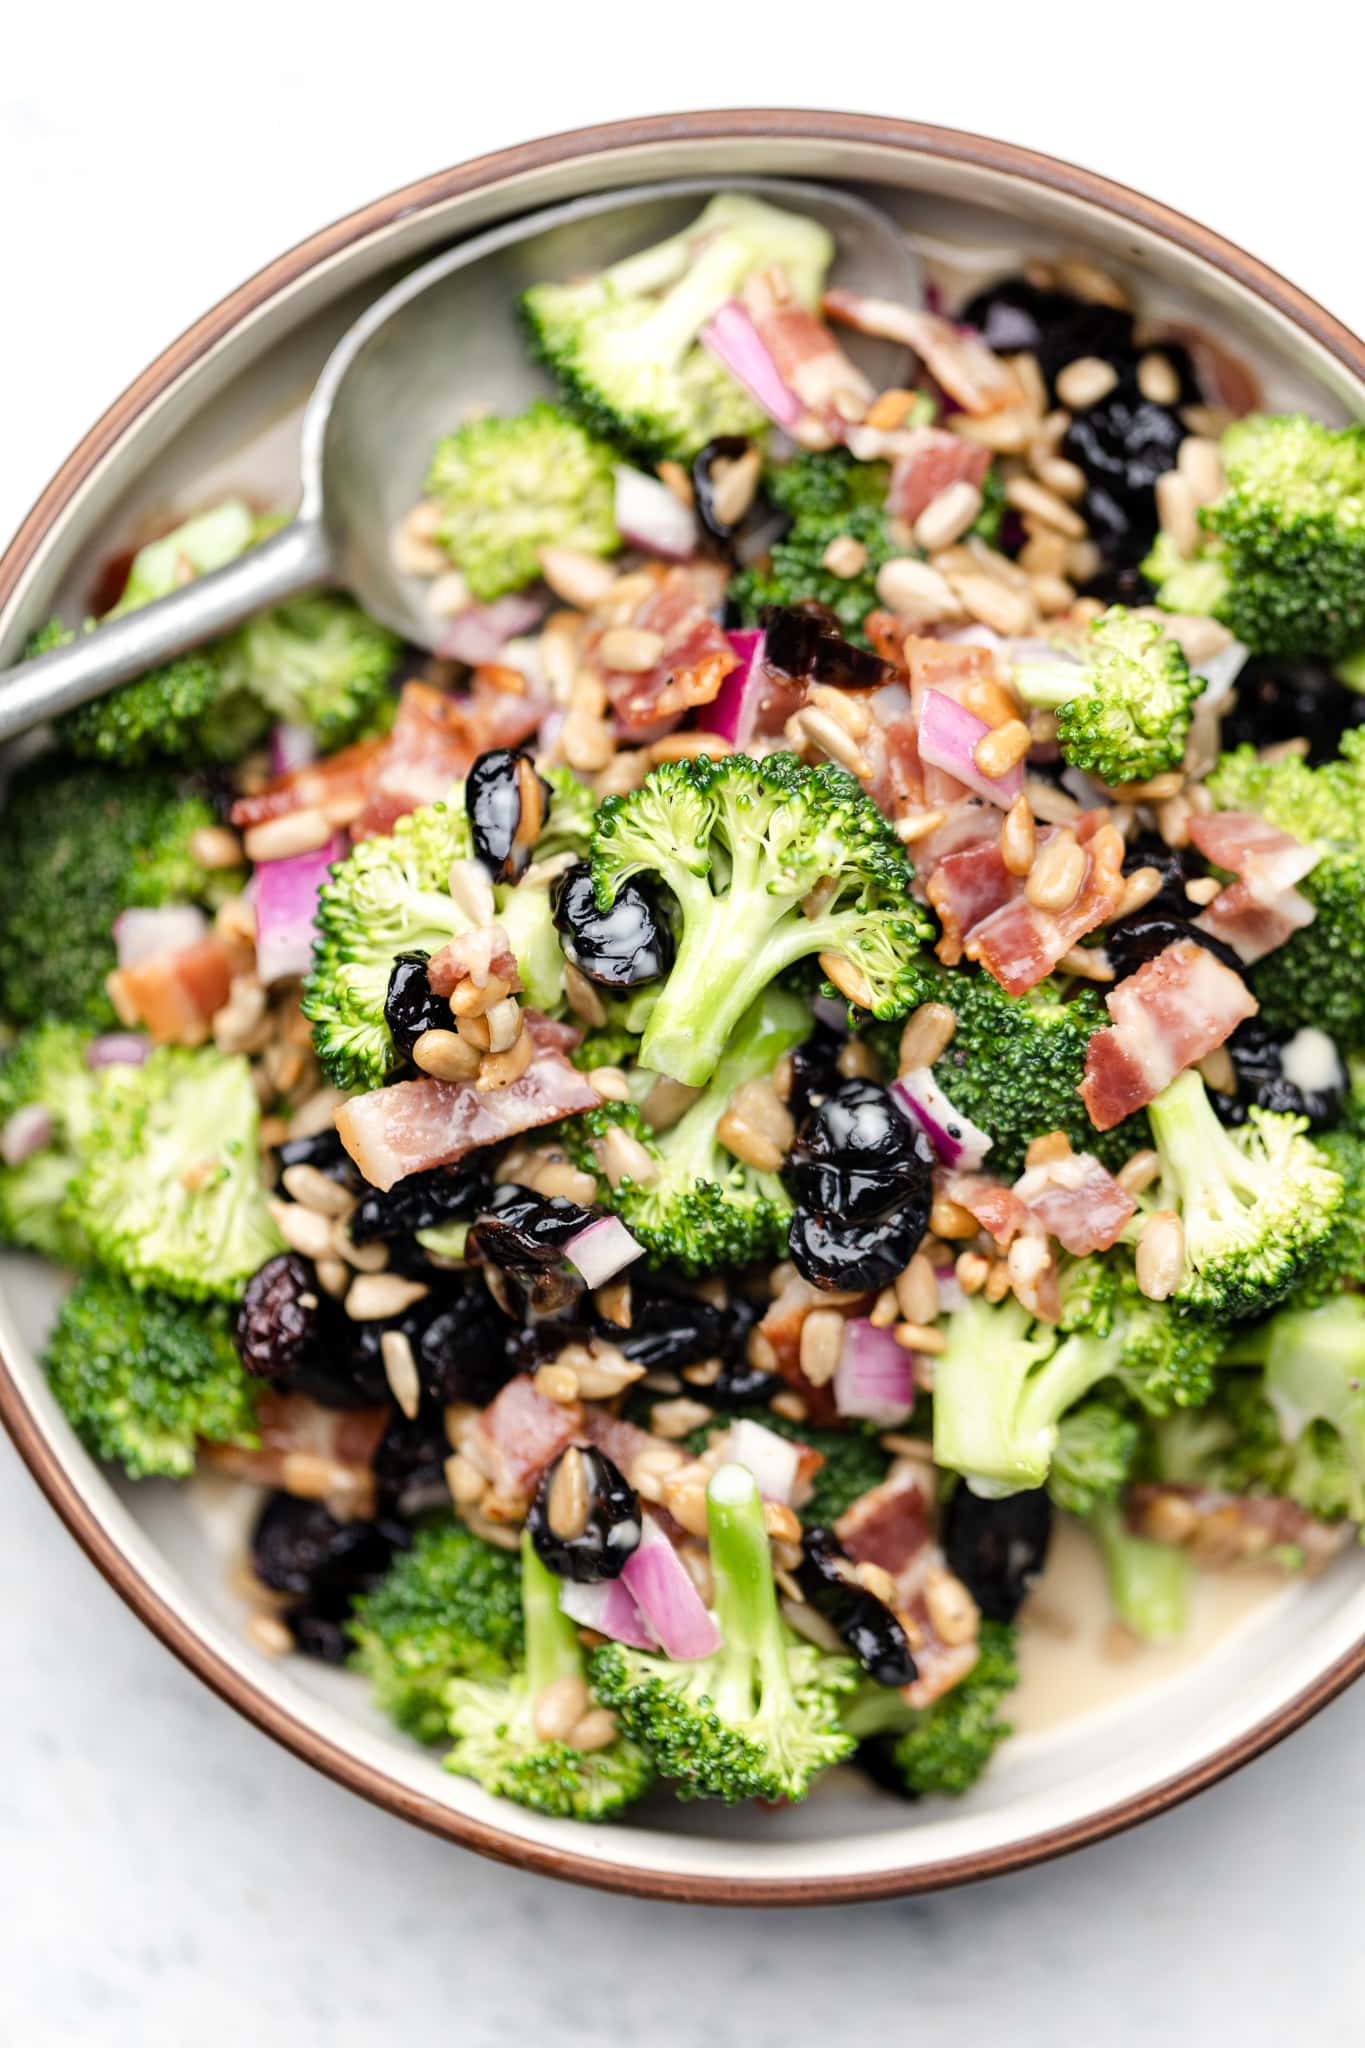 Easy, Healthy Broccoli Salad - All the Healthy Things